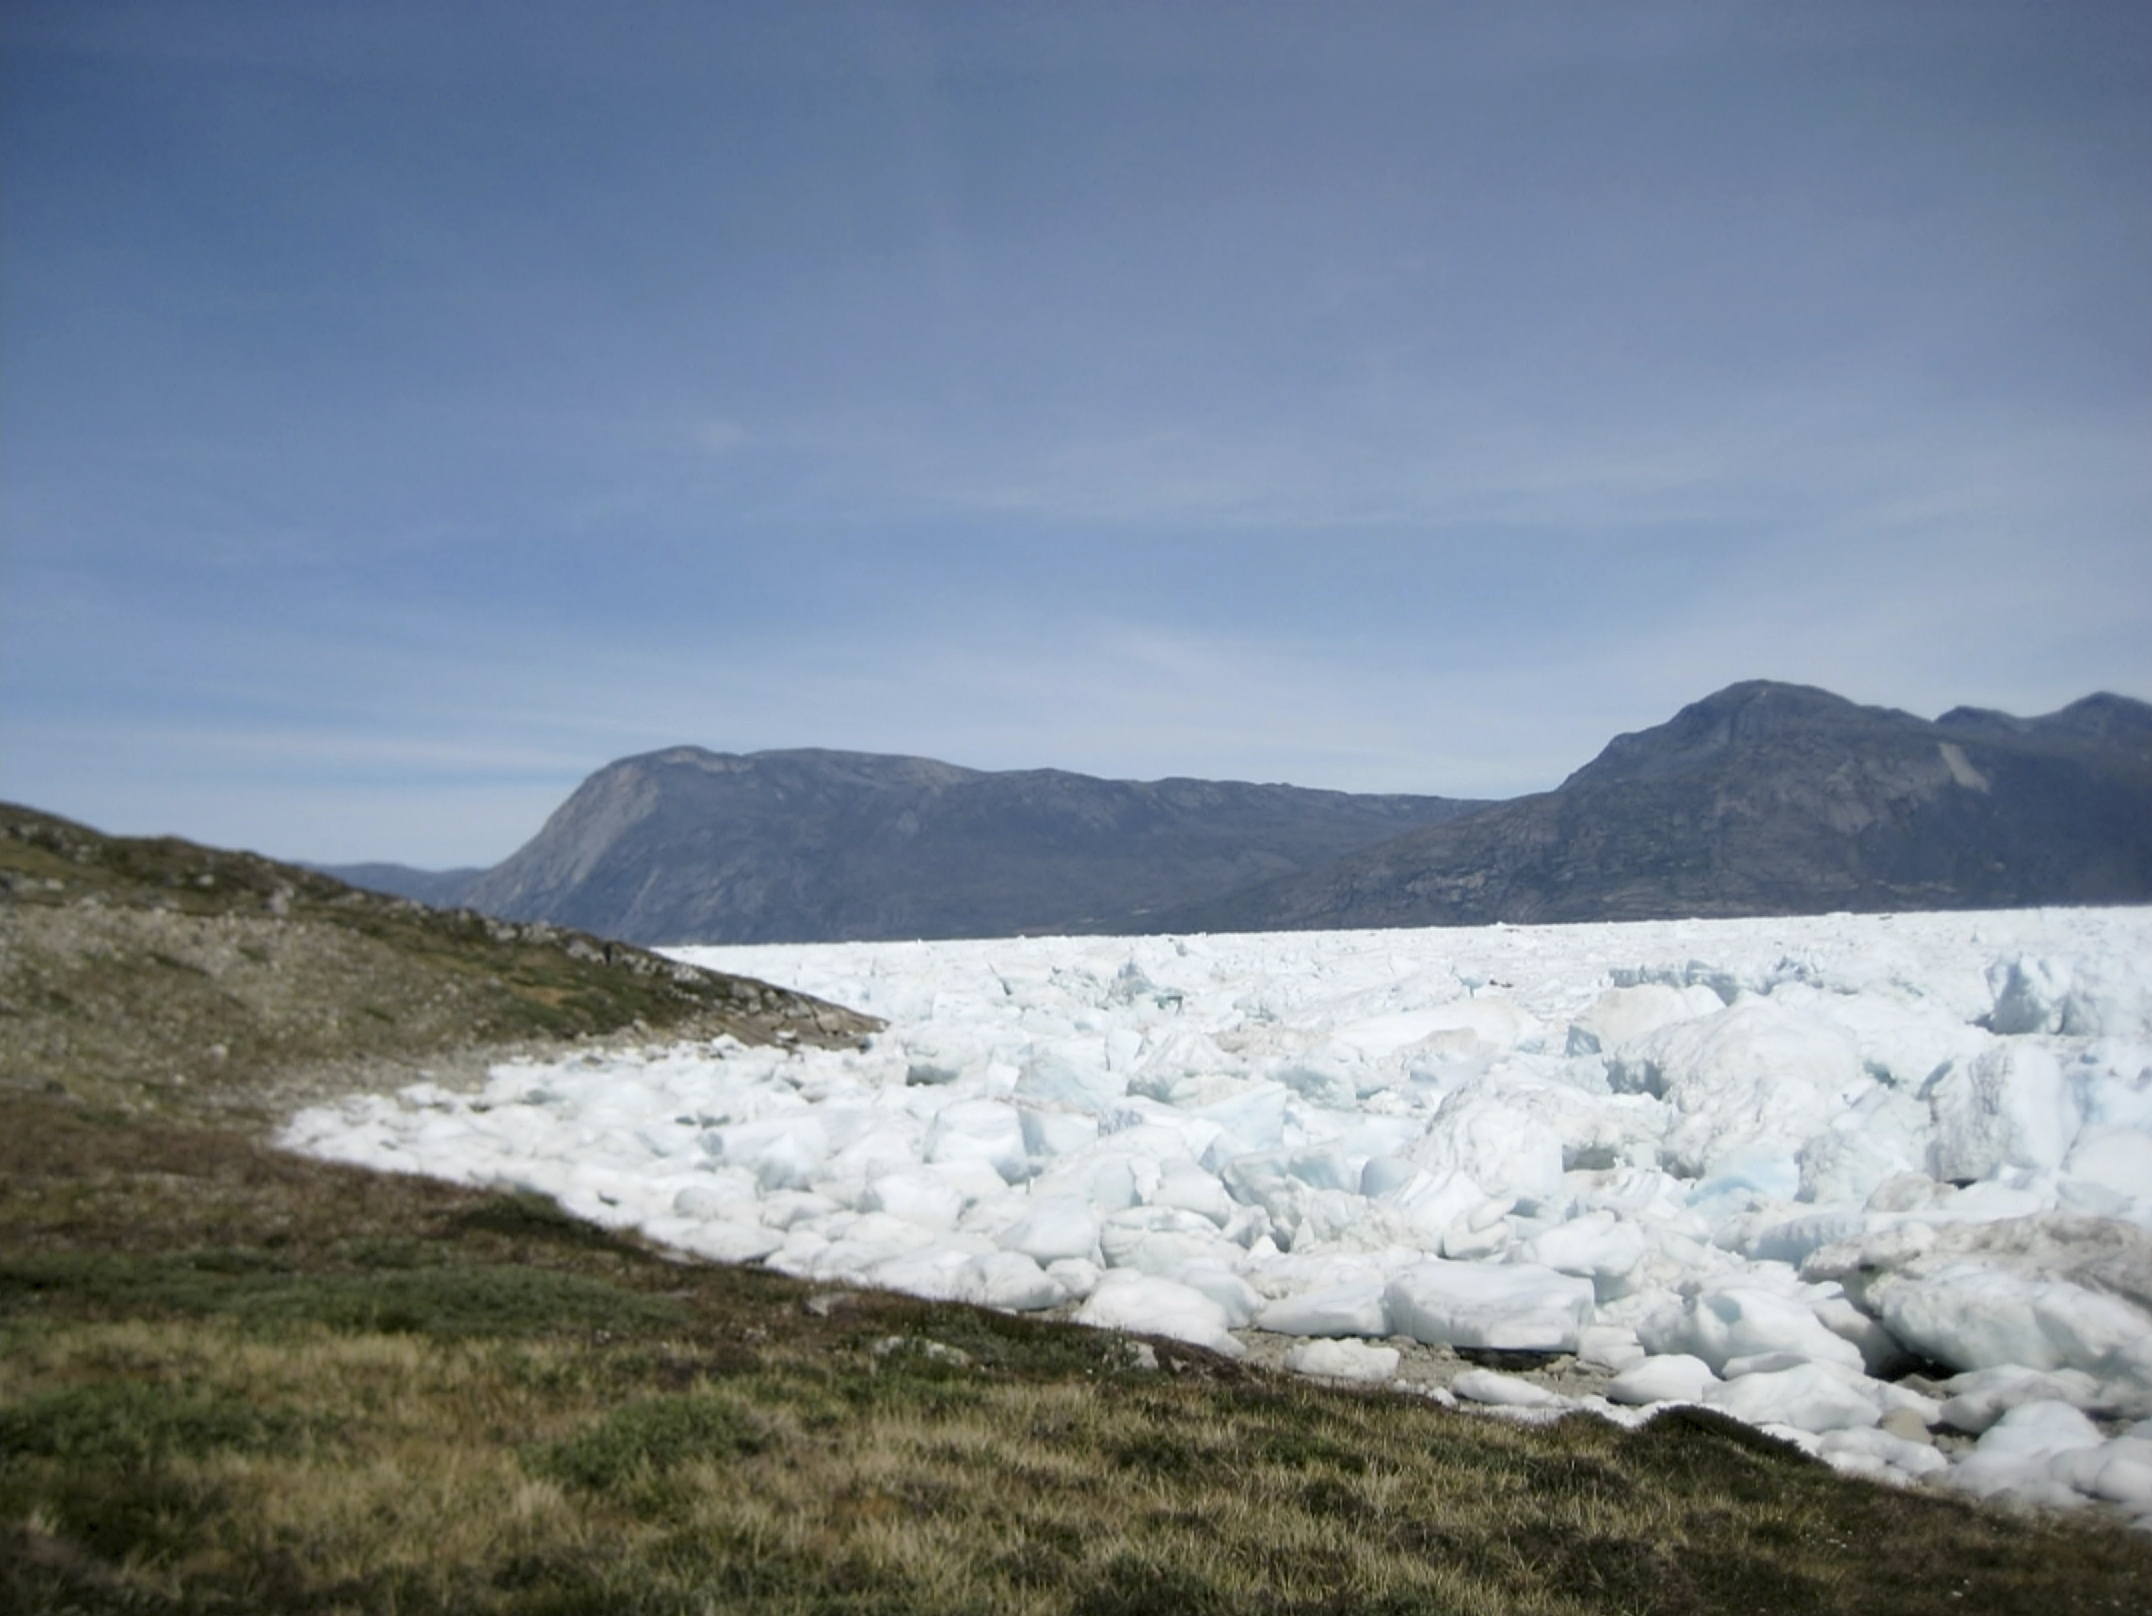 An image taken on June 18, 2019 of the Kangersuneq glacial ice fields in Kapissisillit, Greenland. Milder weather than normal since the start of summer, led to the UN's weather agency voicing concern that the hot air which produced the recent extreme heat wave in Europe could be headed toward Greenland where it could contribute to increased melting of ice. (Keith Virgo—AP)